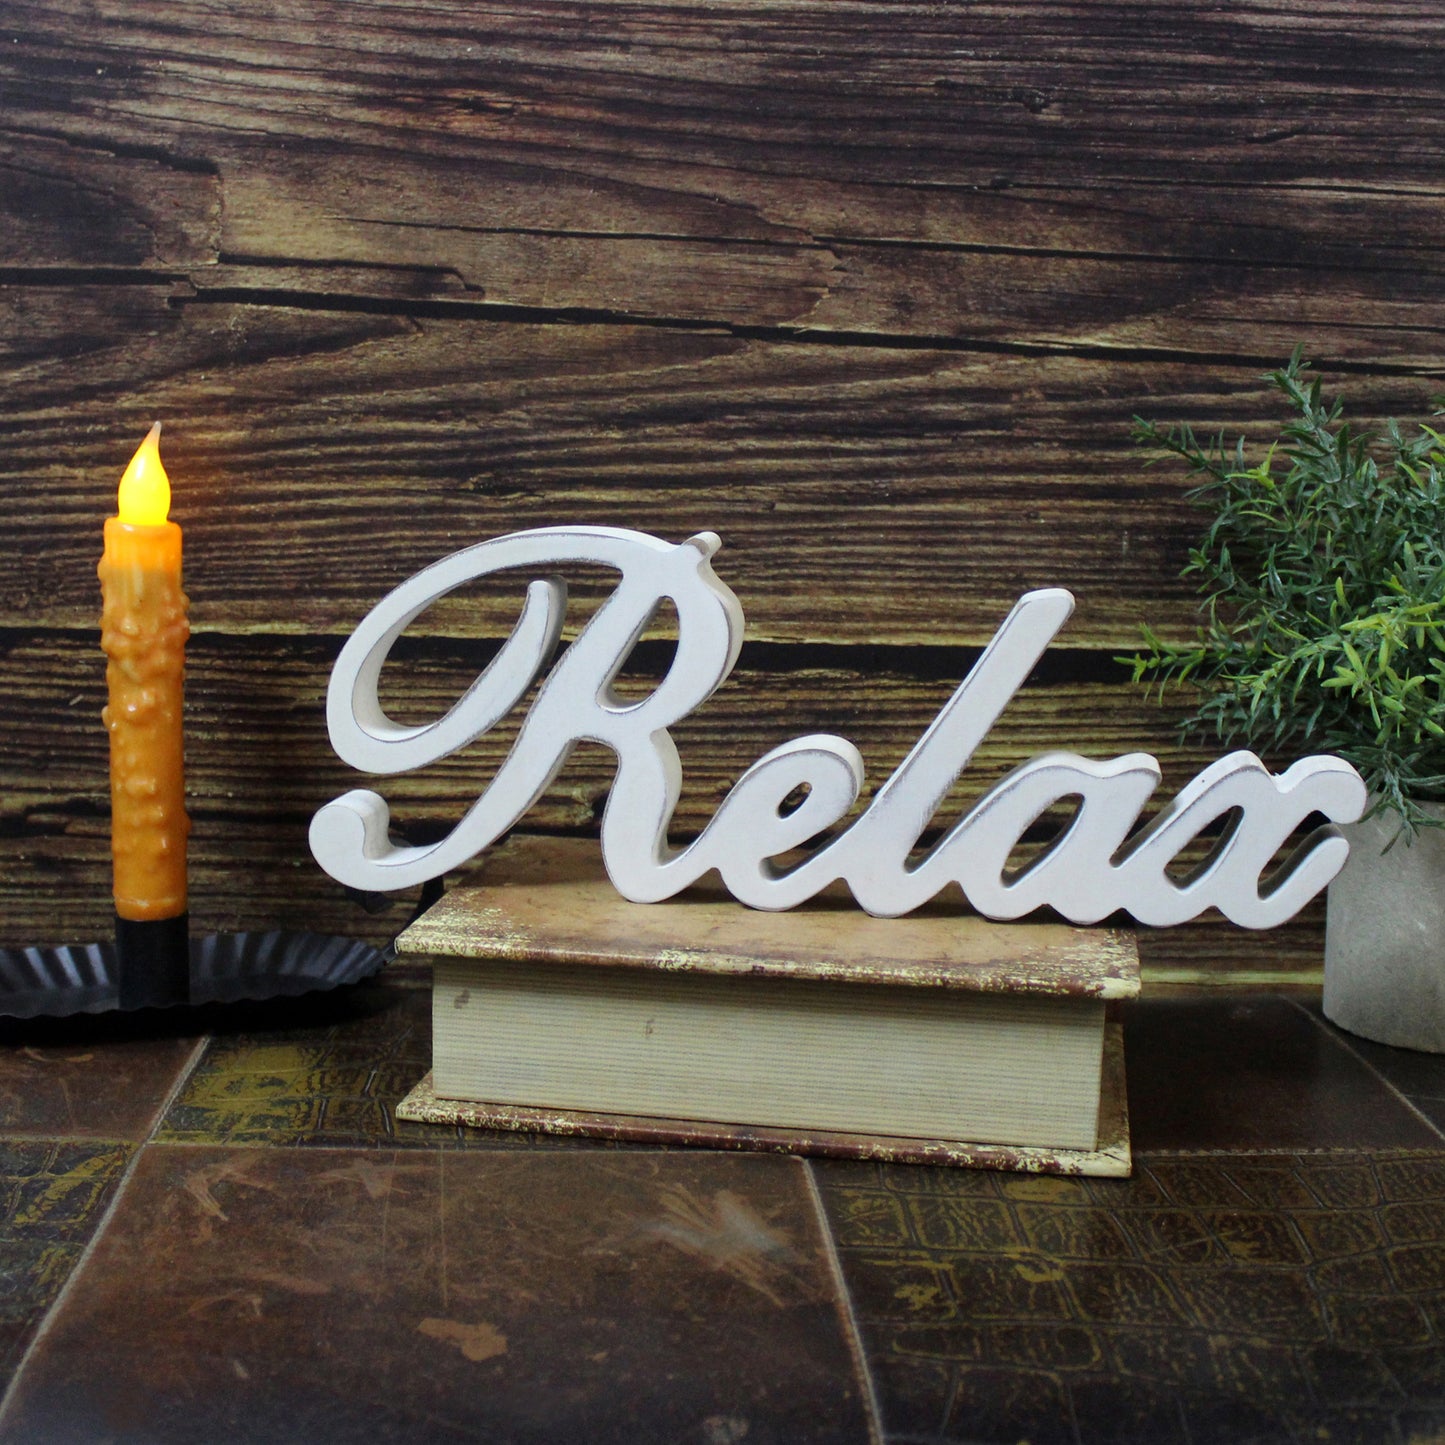 CVHOMEDECO. Rustic Vintage Distressed White Wooden Words Sign Free Standing "Relax" Tabletop/Shelf/Home Wall/Office Decoration Art, 12 x 4.25 x 1 Inch